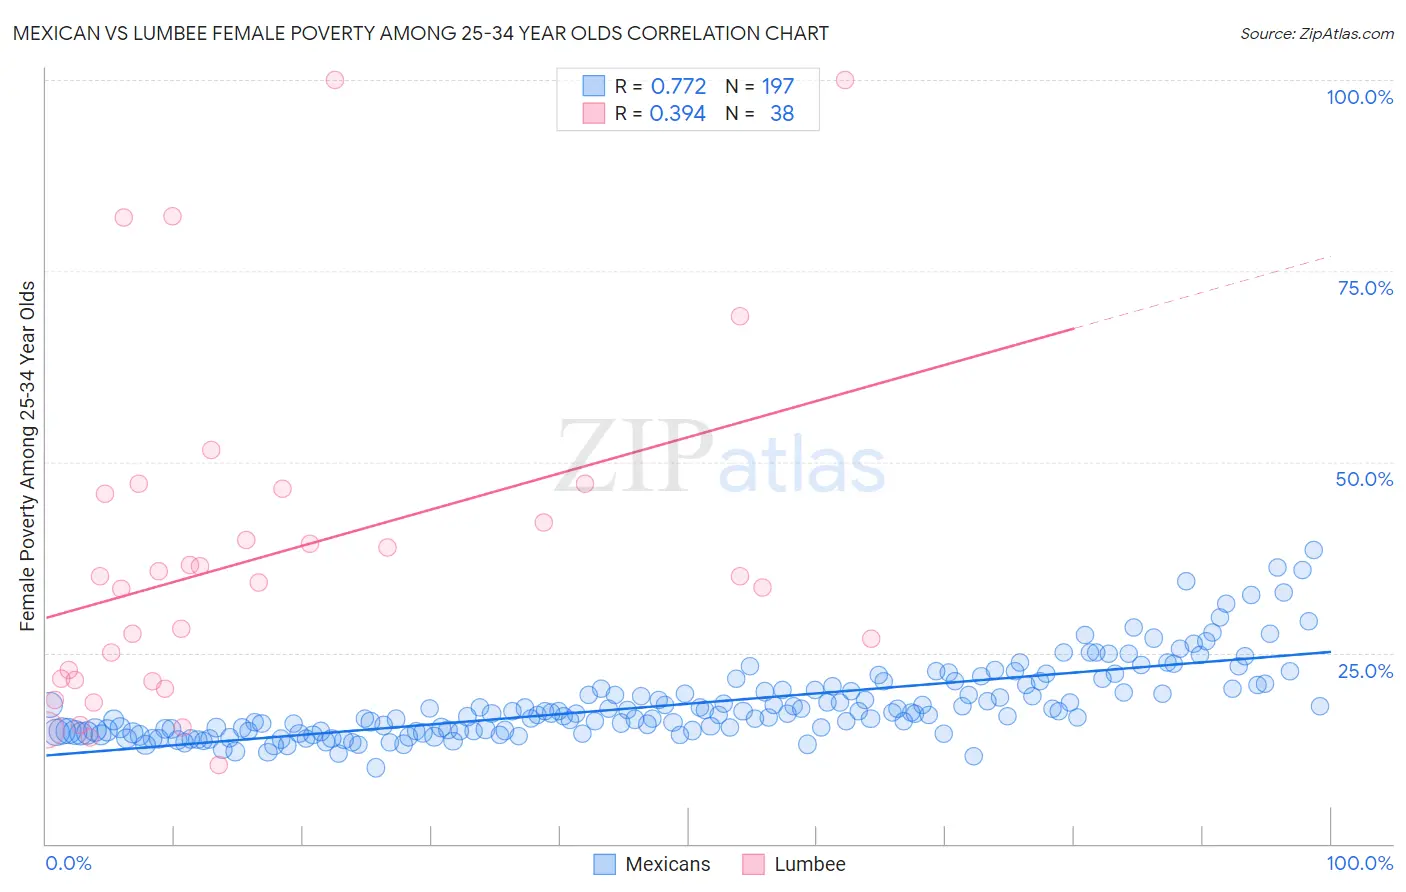 Mexican vs Lumbee Female Poverty Among 25-34 Year Olds